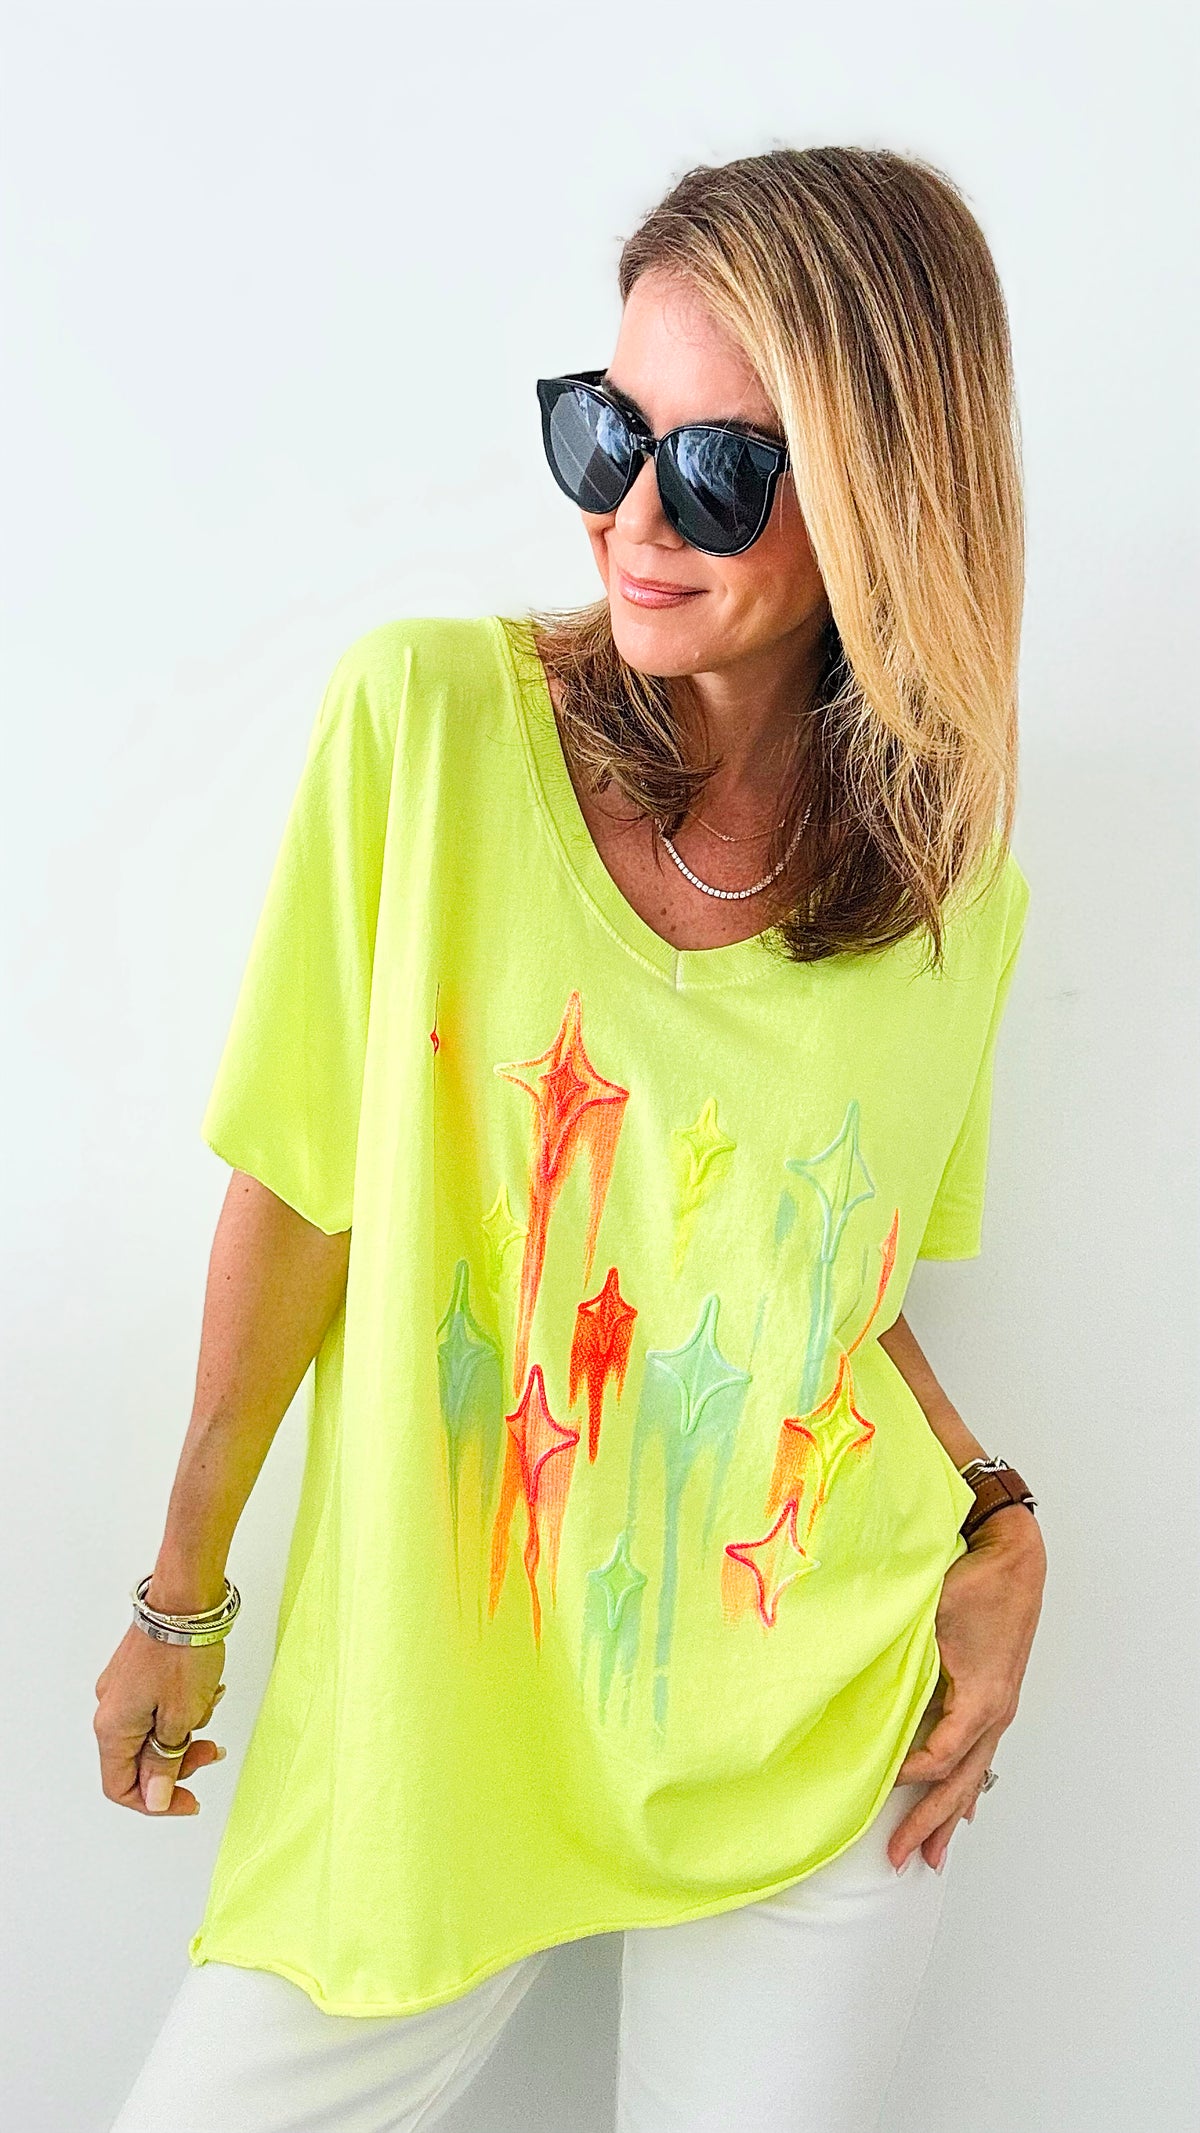 Starburst Italian Tee - Neon Yellow-110 Short Sleeve Tops-Italianissimo-Coastal Bloom Boutique, find the trendiest versions of the popular styles and looks Located in Indialantic, FL